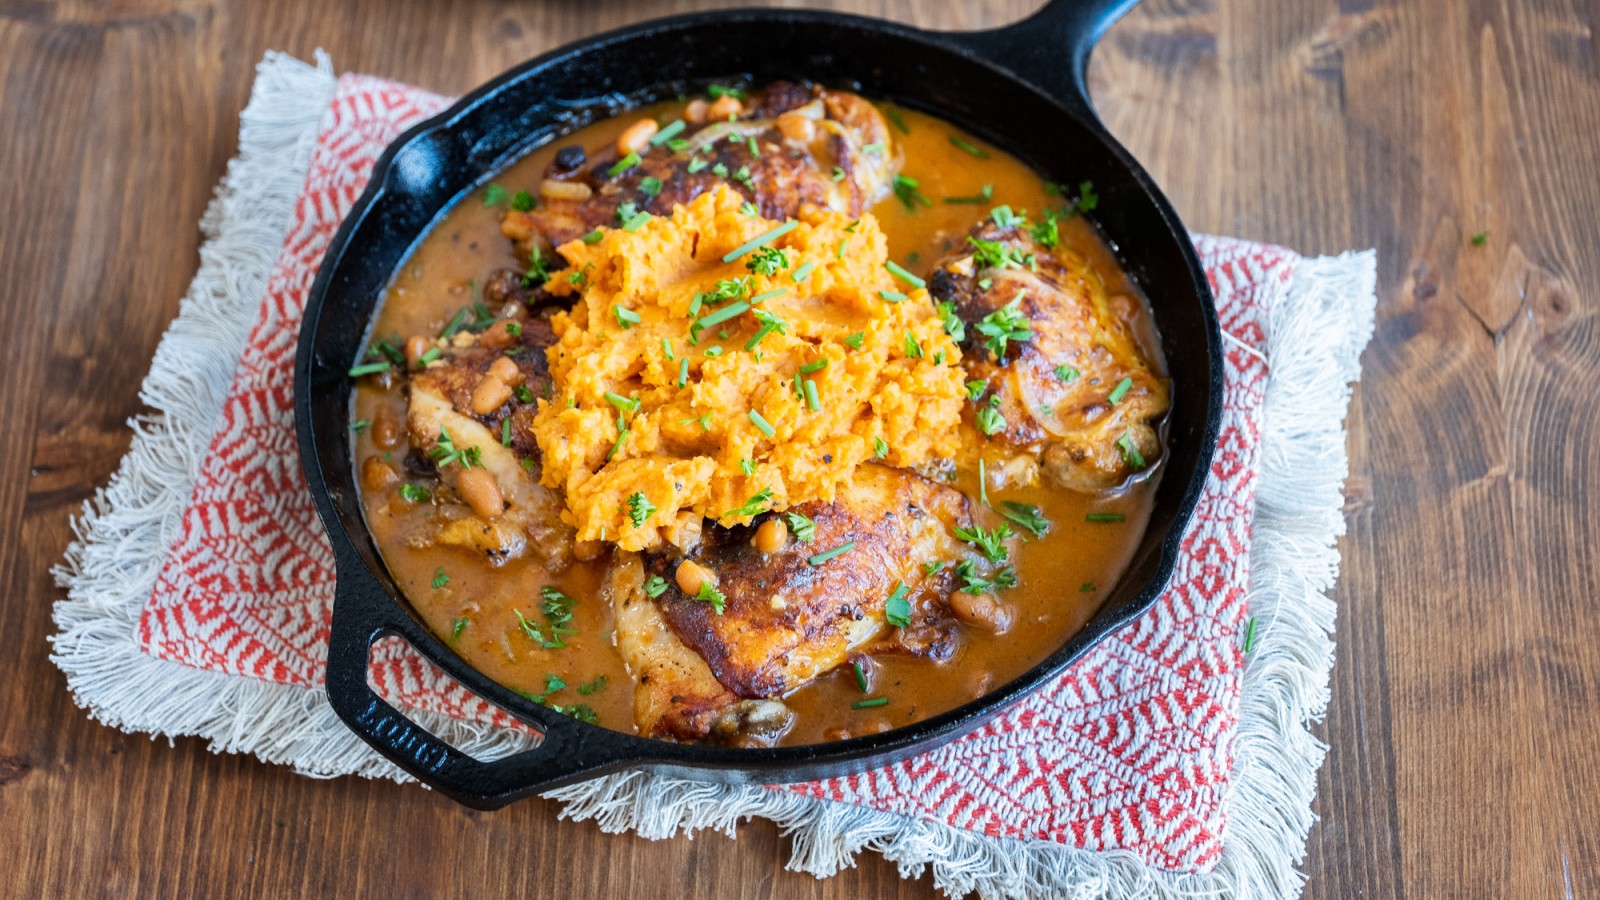 Image of Mustard Bean Braised Chicken Thighs with Mashed Sweet Potatoes